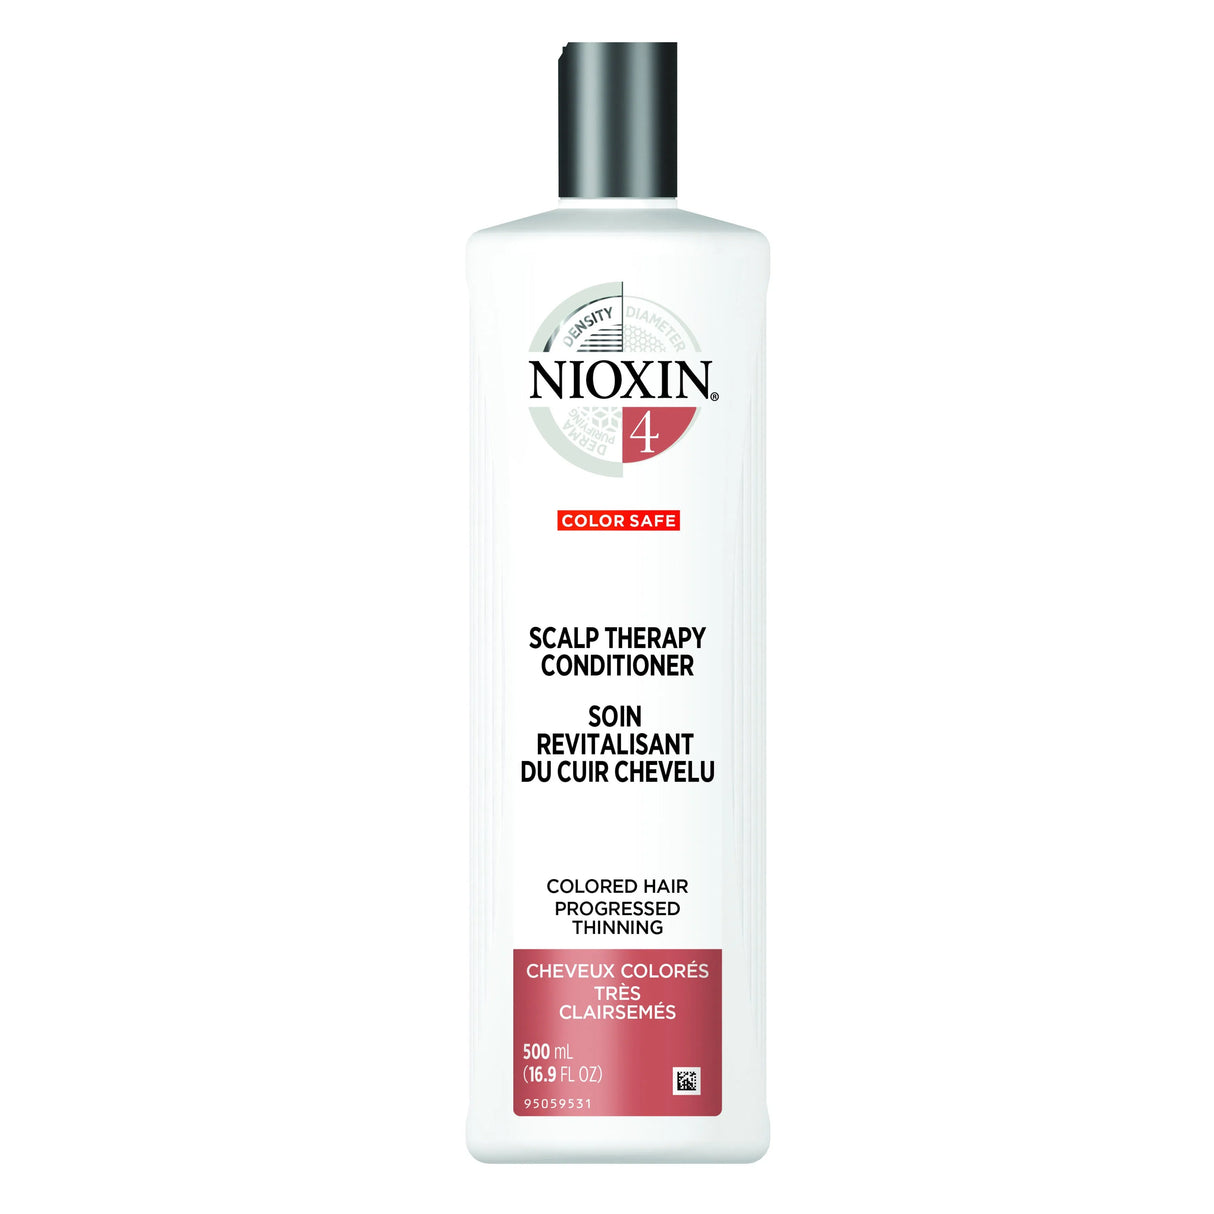 System 4 Scalp Therapy Conditioner-Nioxin